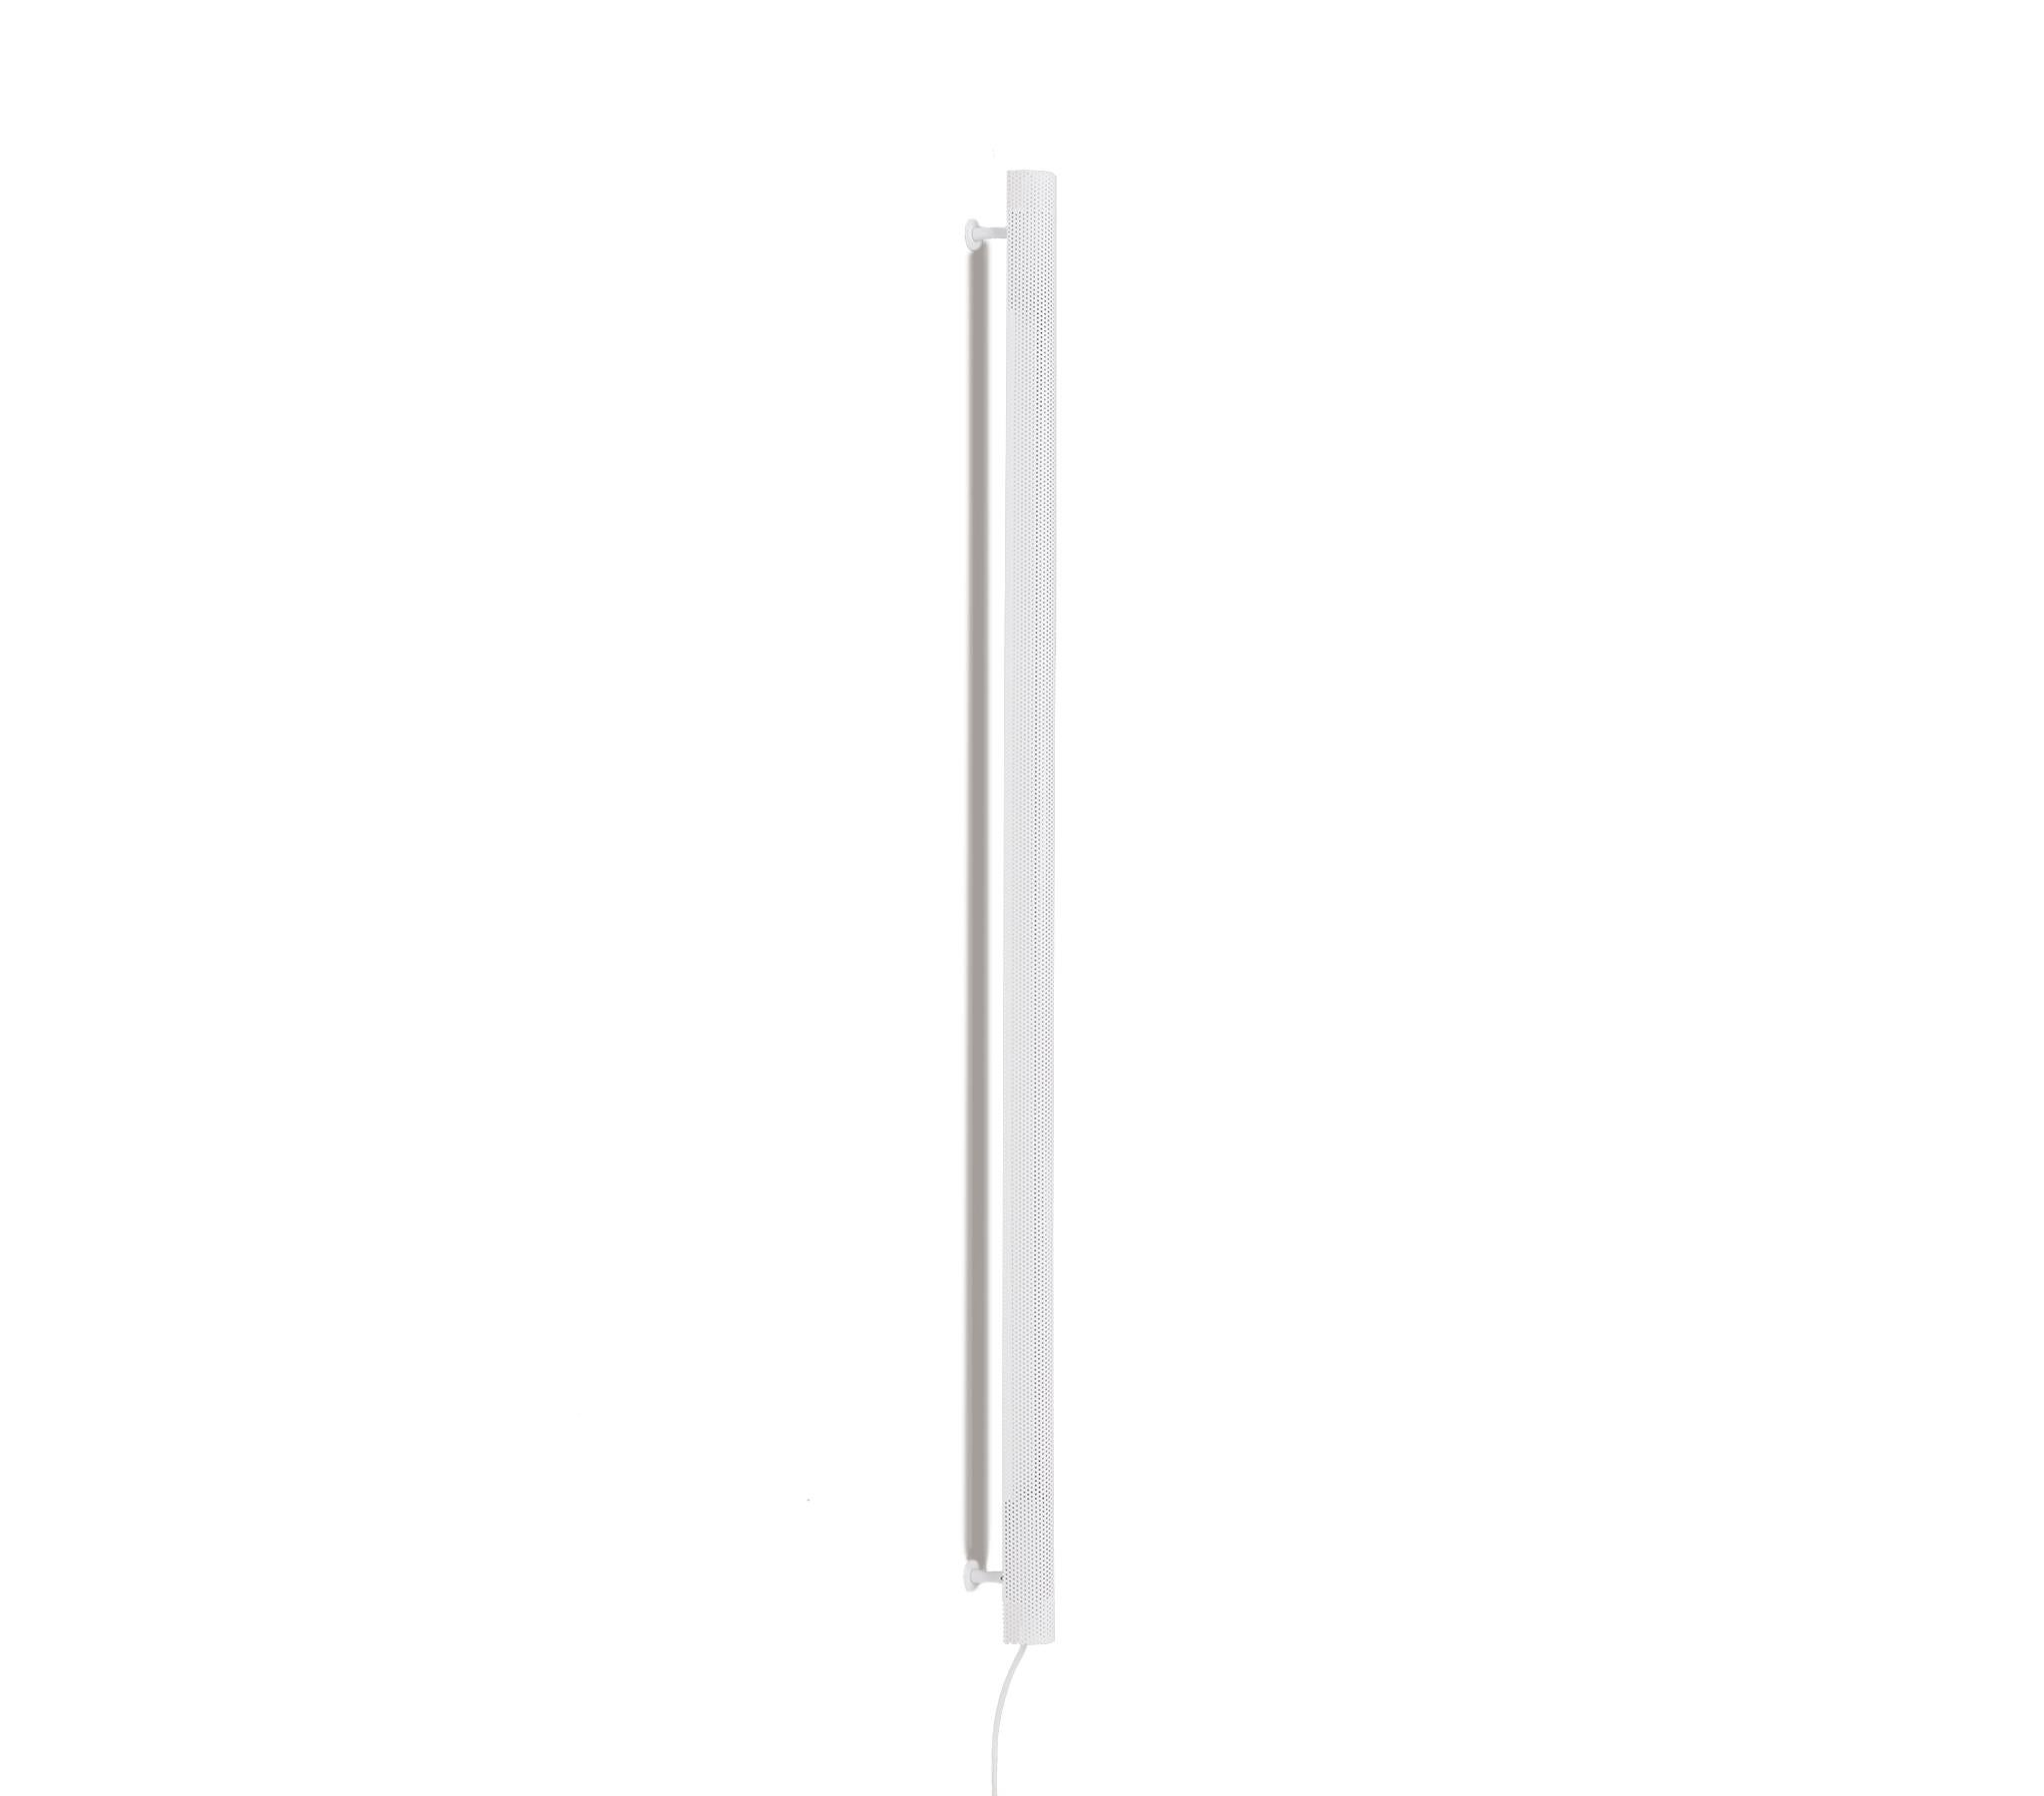 Radent wall lamp is based on a standard LED light and is a slim radiant linear wall lamp. The Radent Wall Lamp is available in two sizes with a black, white or brass finish. Measure: 1350 mm.